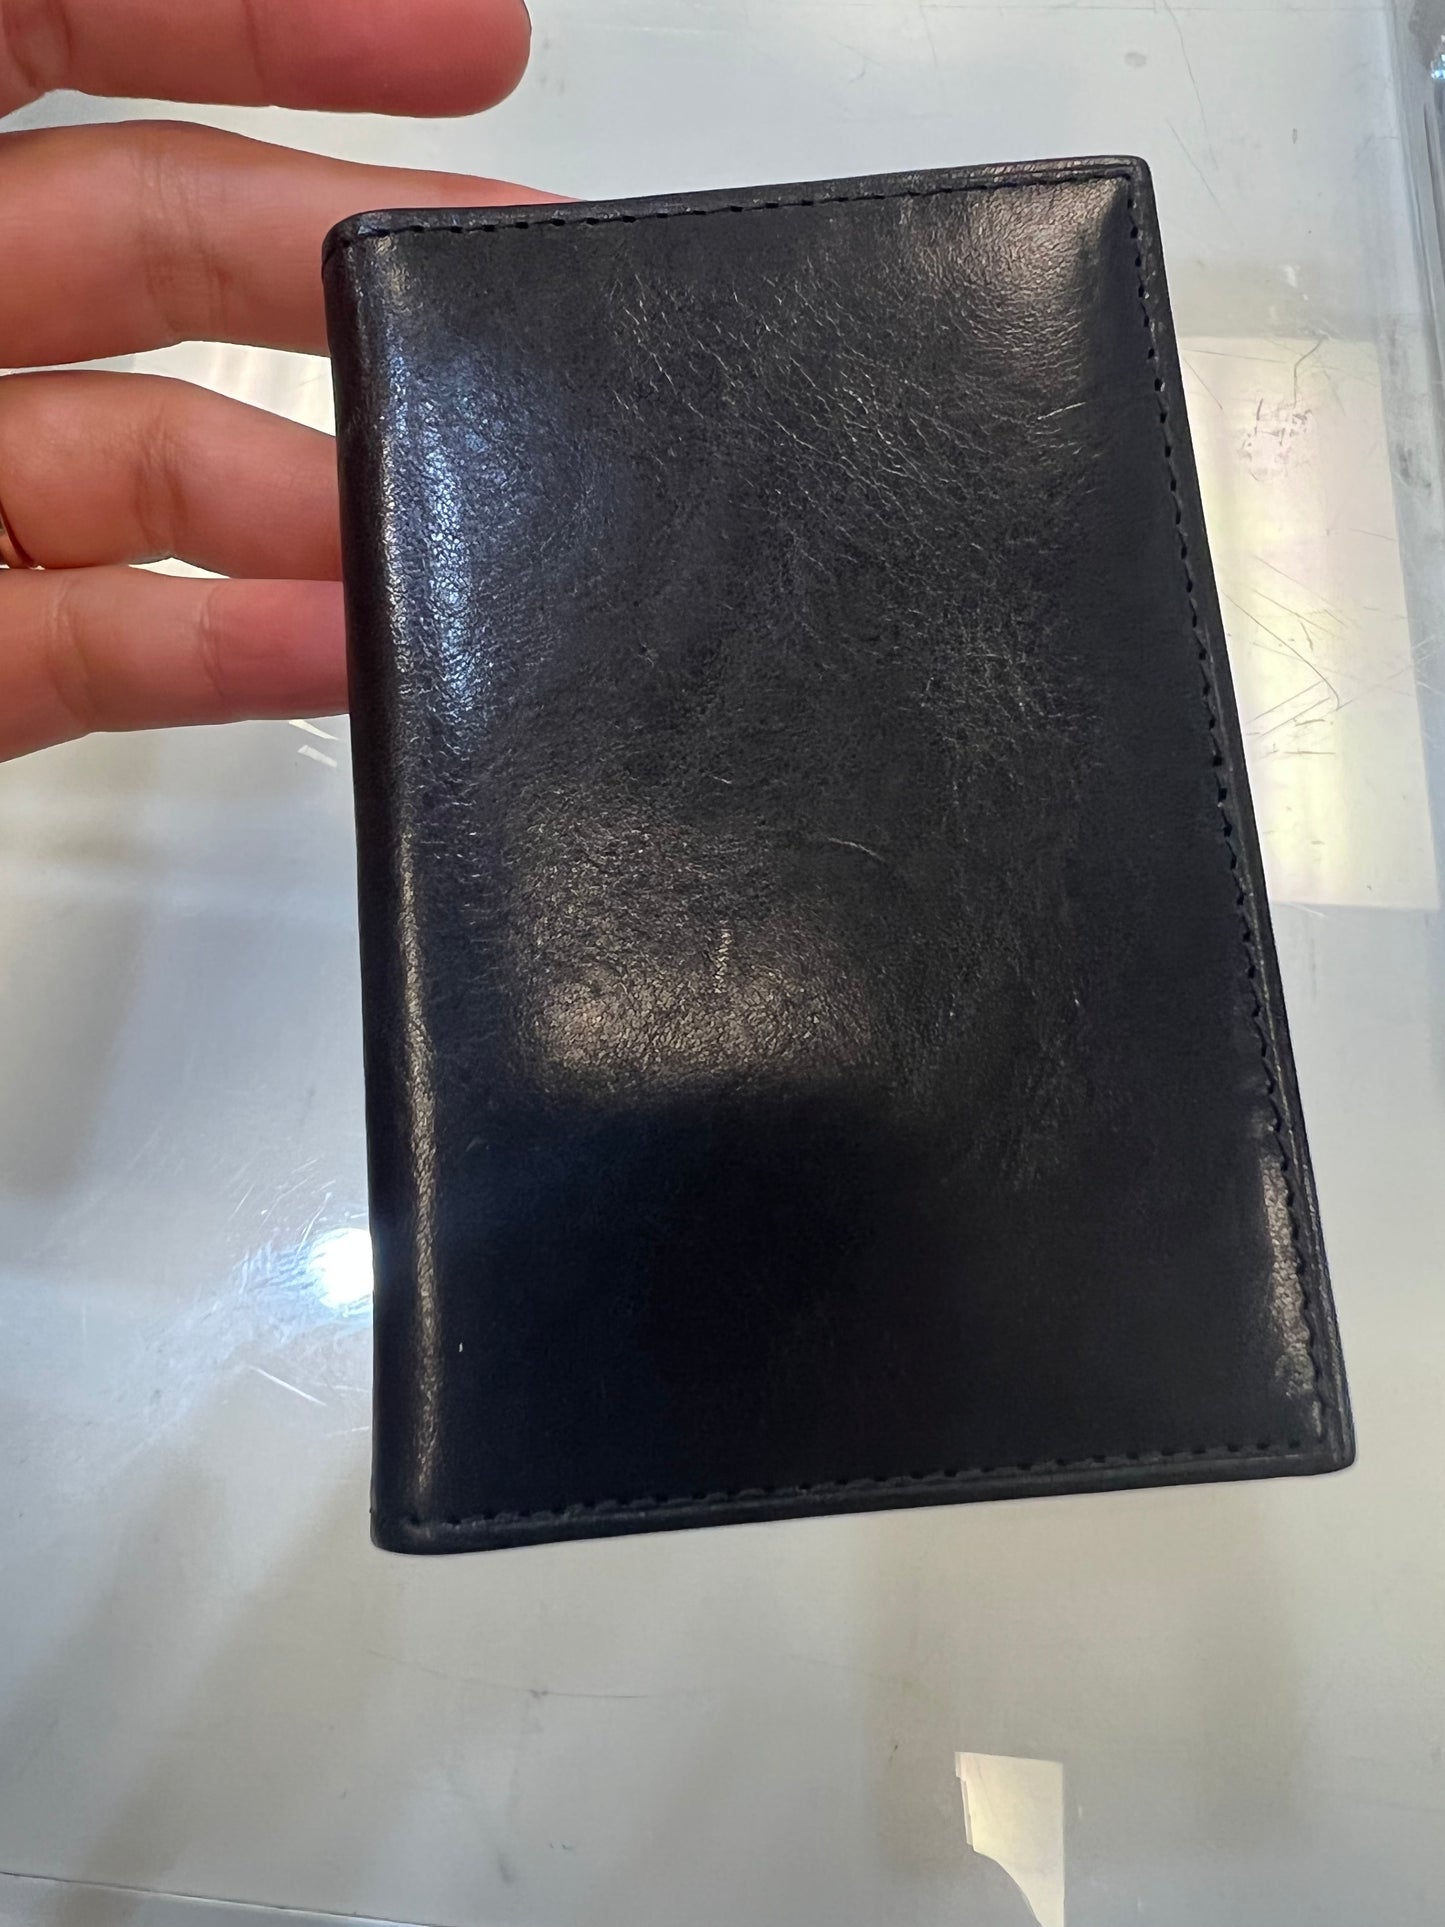 Bosca Calling Card Case Leather Wallet